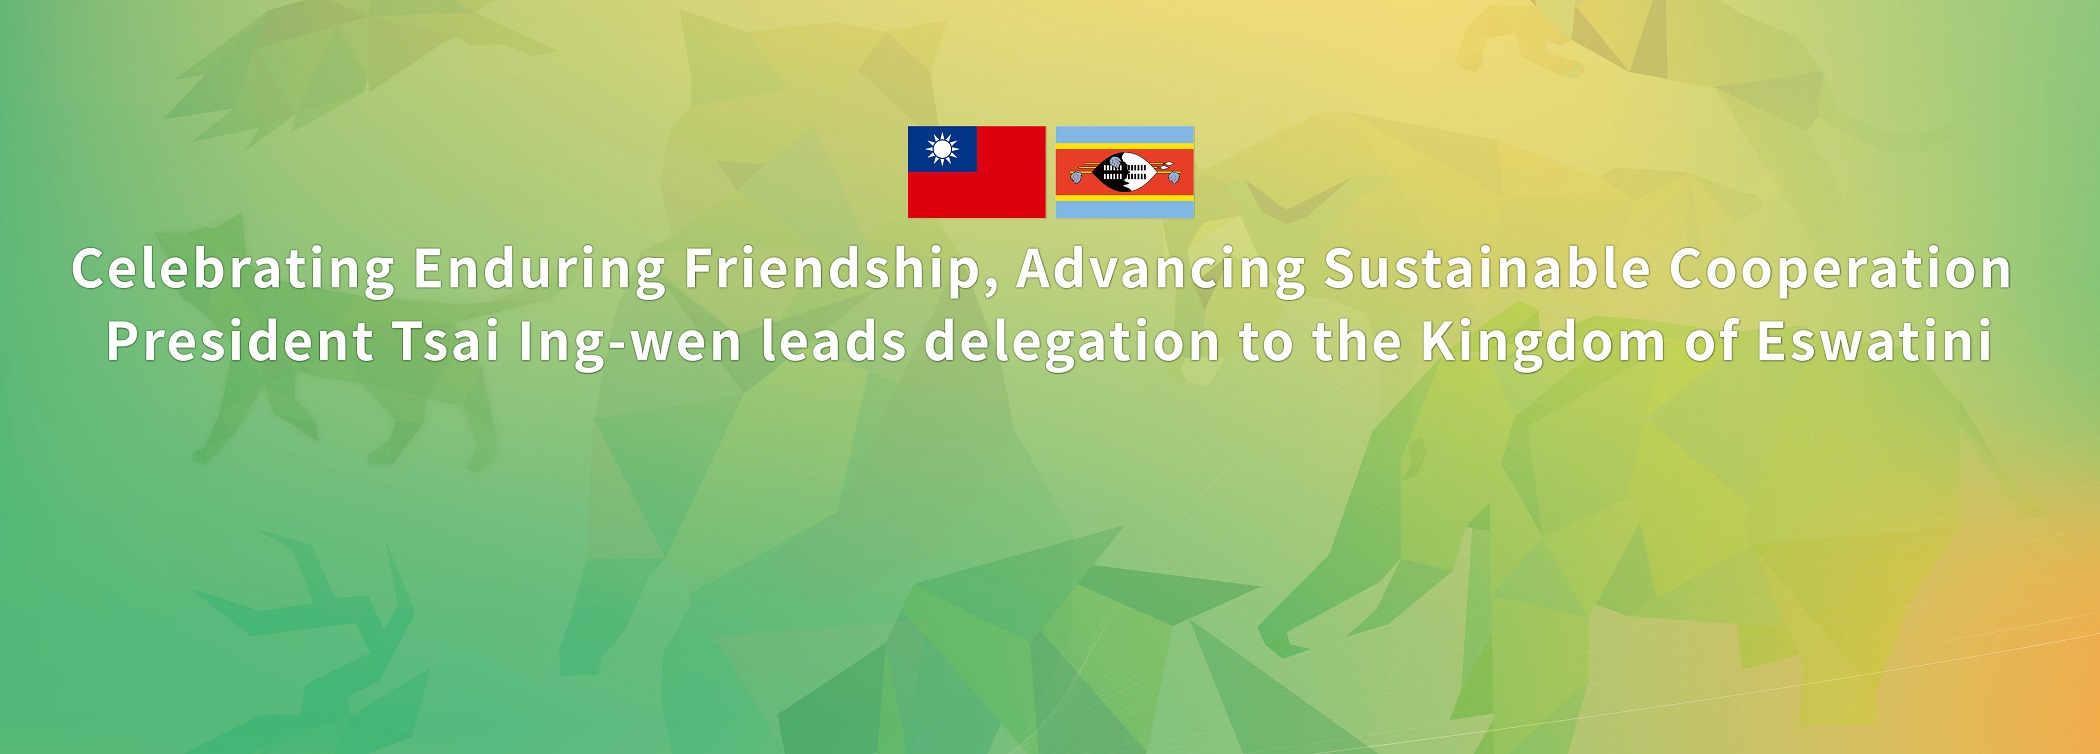 Celebrating Enduring Friendship, Advancing Sustainable Cooperation President Tsai Ing-wen leads delegation to the Kingdom of Eswatini